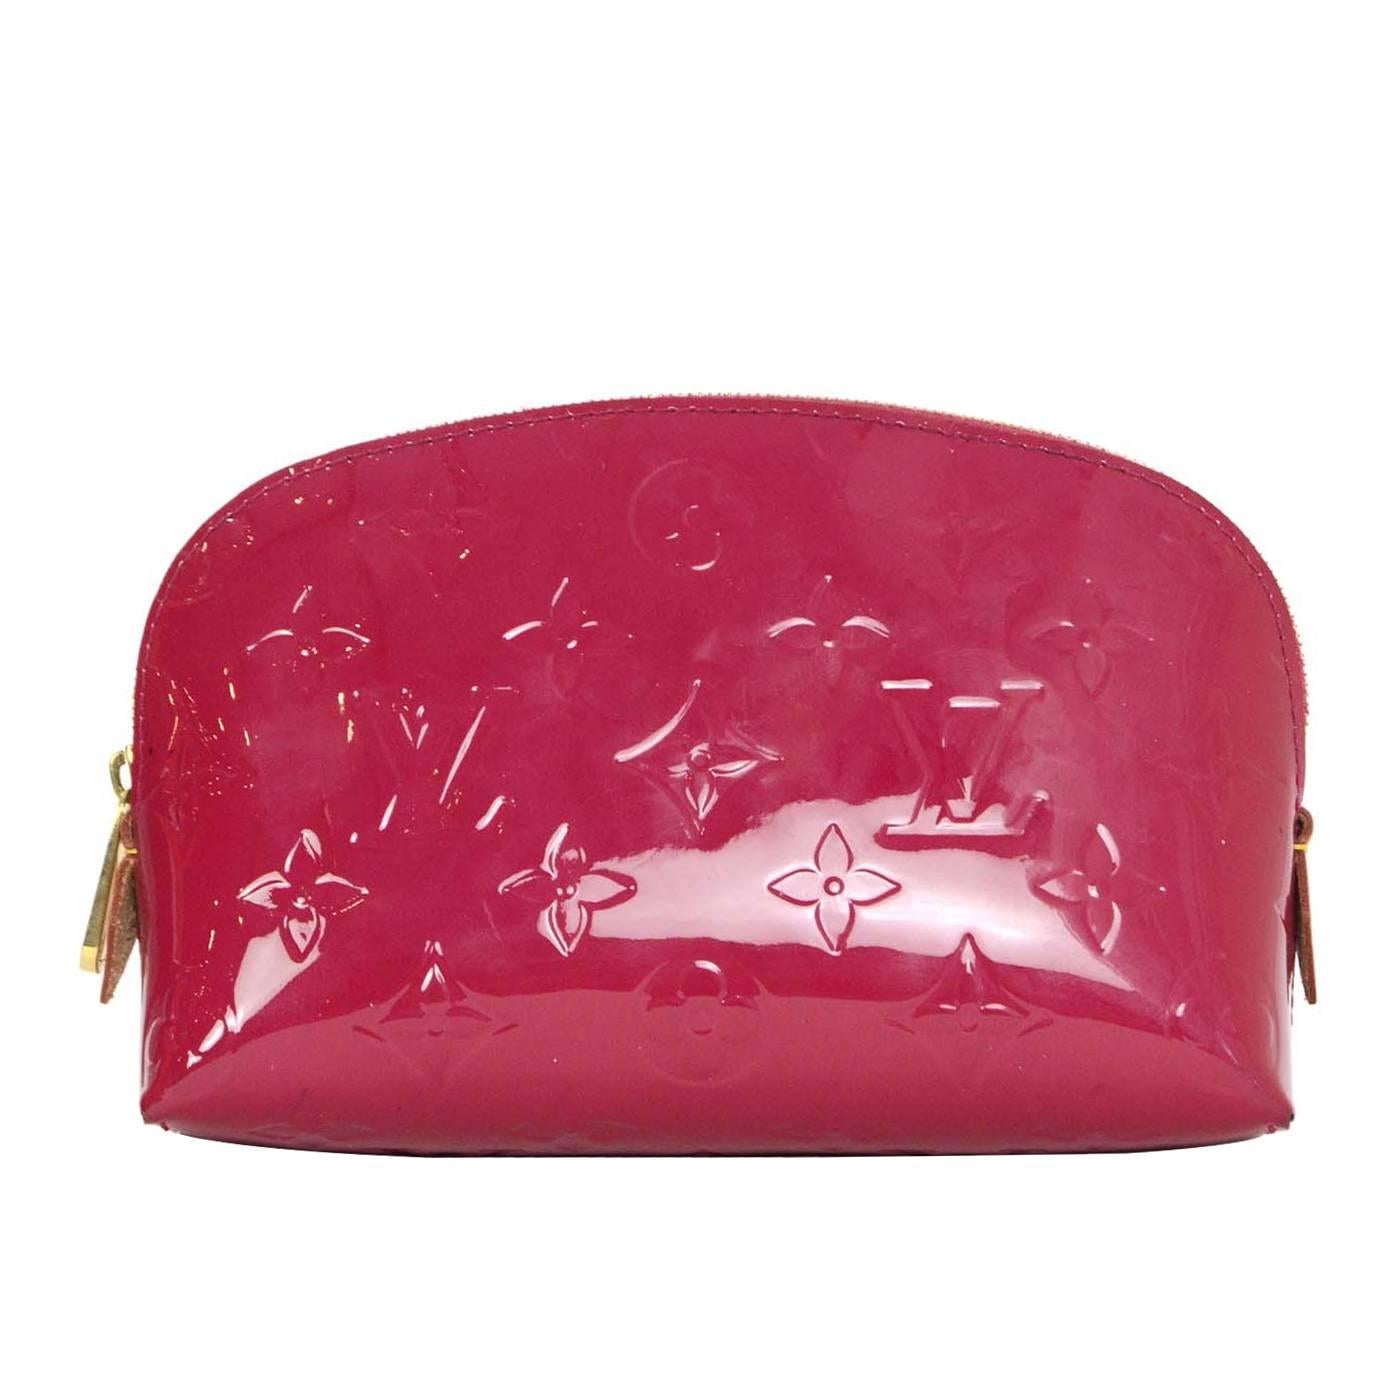 Louis Vuitton Magenta Vernis Cosmetic Pouch GHW